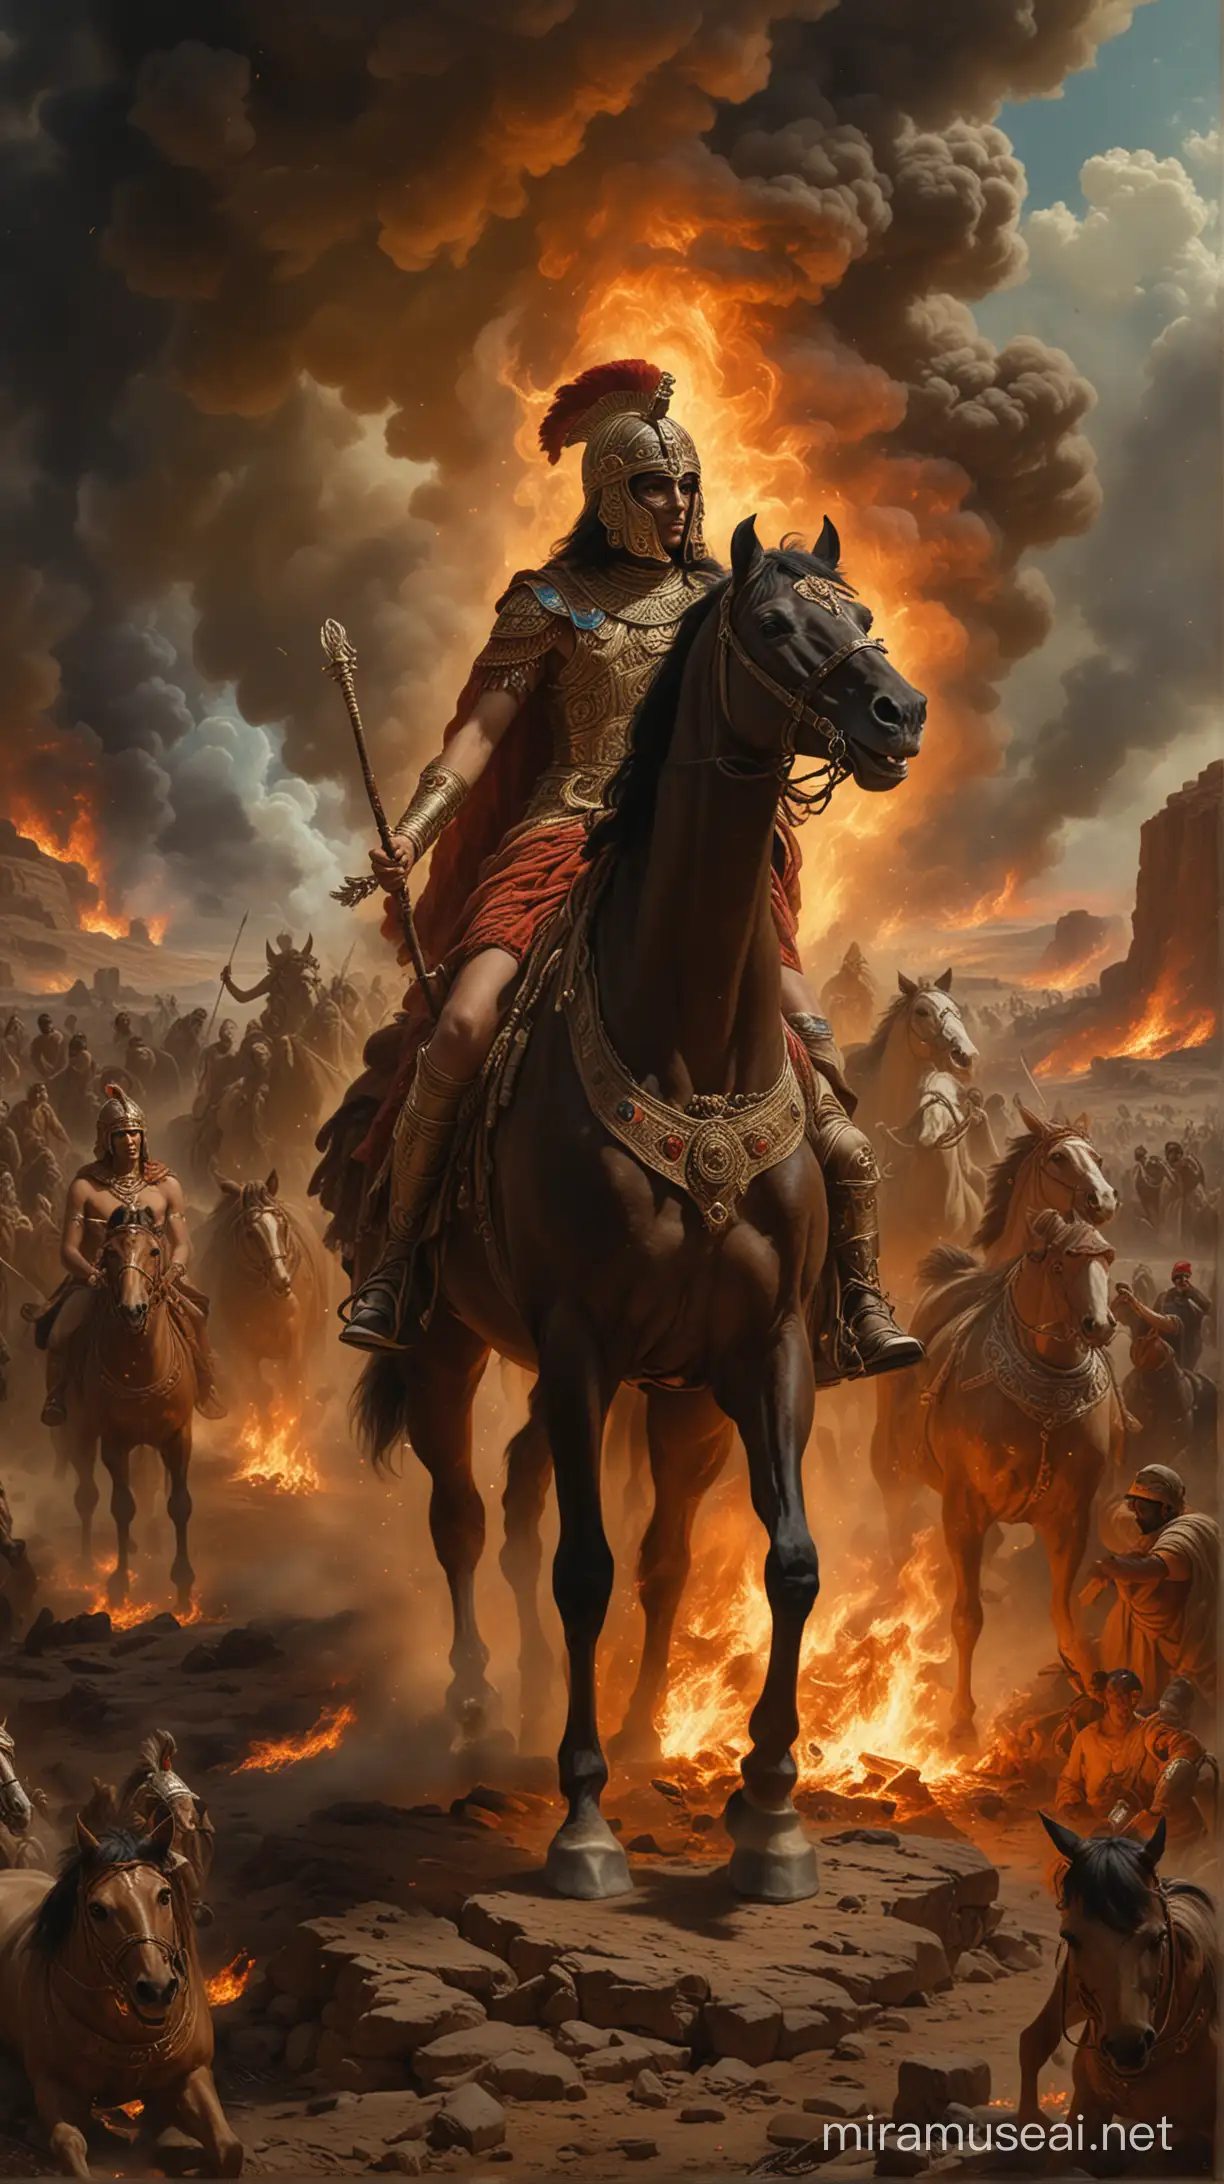 An intriguing (((scene))) featuring Cleopatra's brother riding a horse in a (((moody fire-filled landscape))), with a distinctive, ornate mask obscuring his face, framed by a gathering of figures who appear to be observing with a mix of curiosity and awe